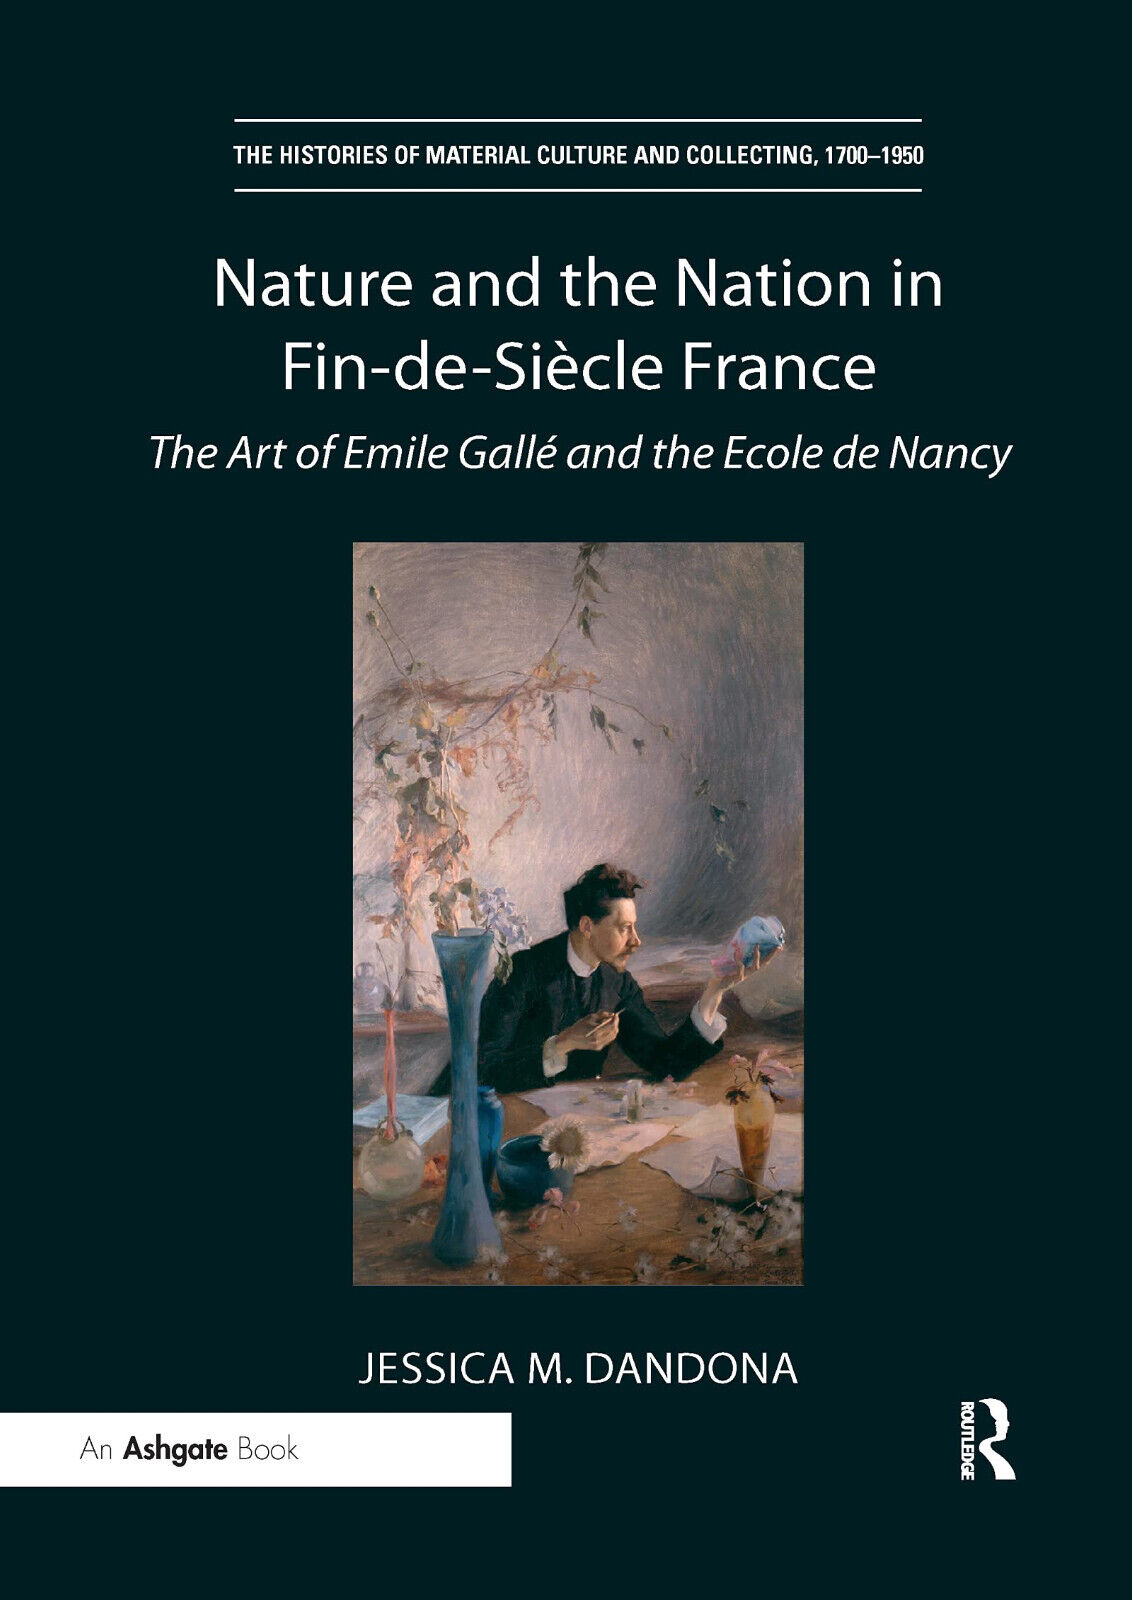 Nature And The Nation In Fin-de-Siecle France - Jessica M. Dandona - 2021